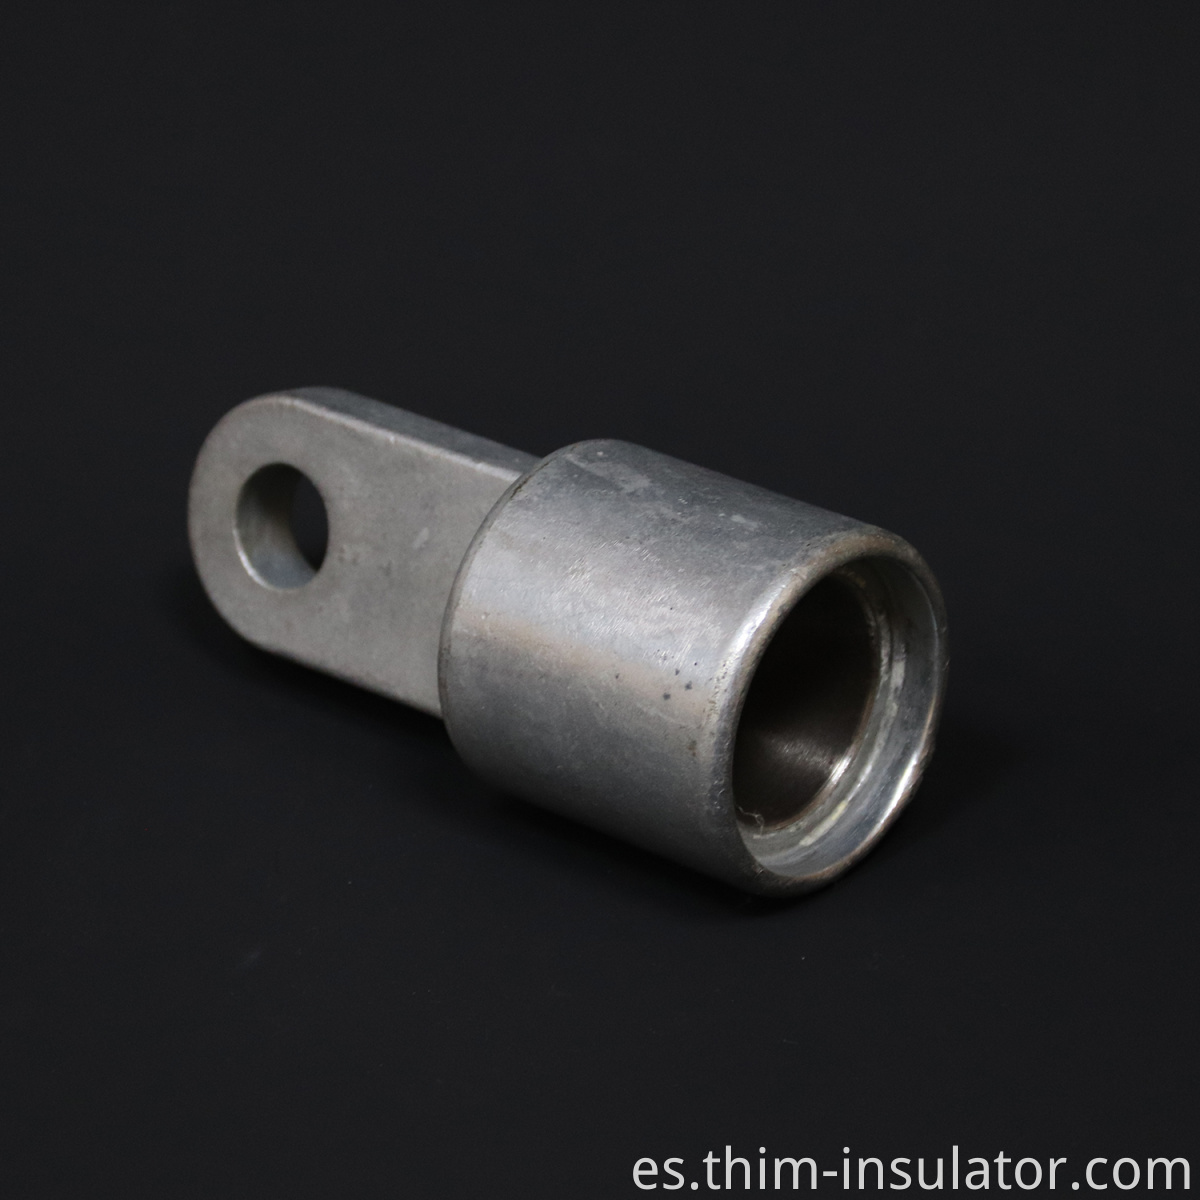 flanged end fittings